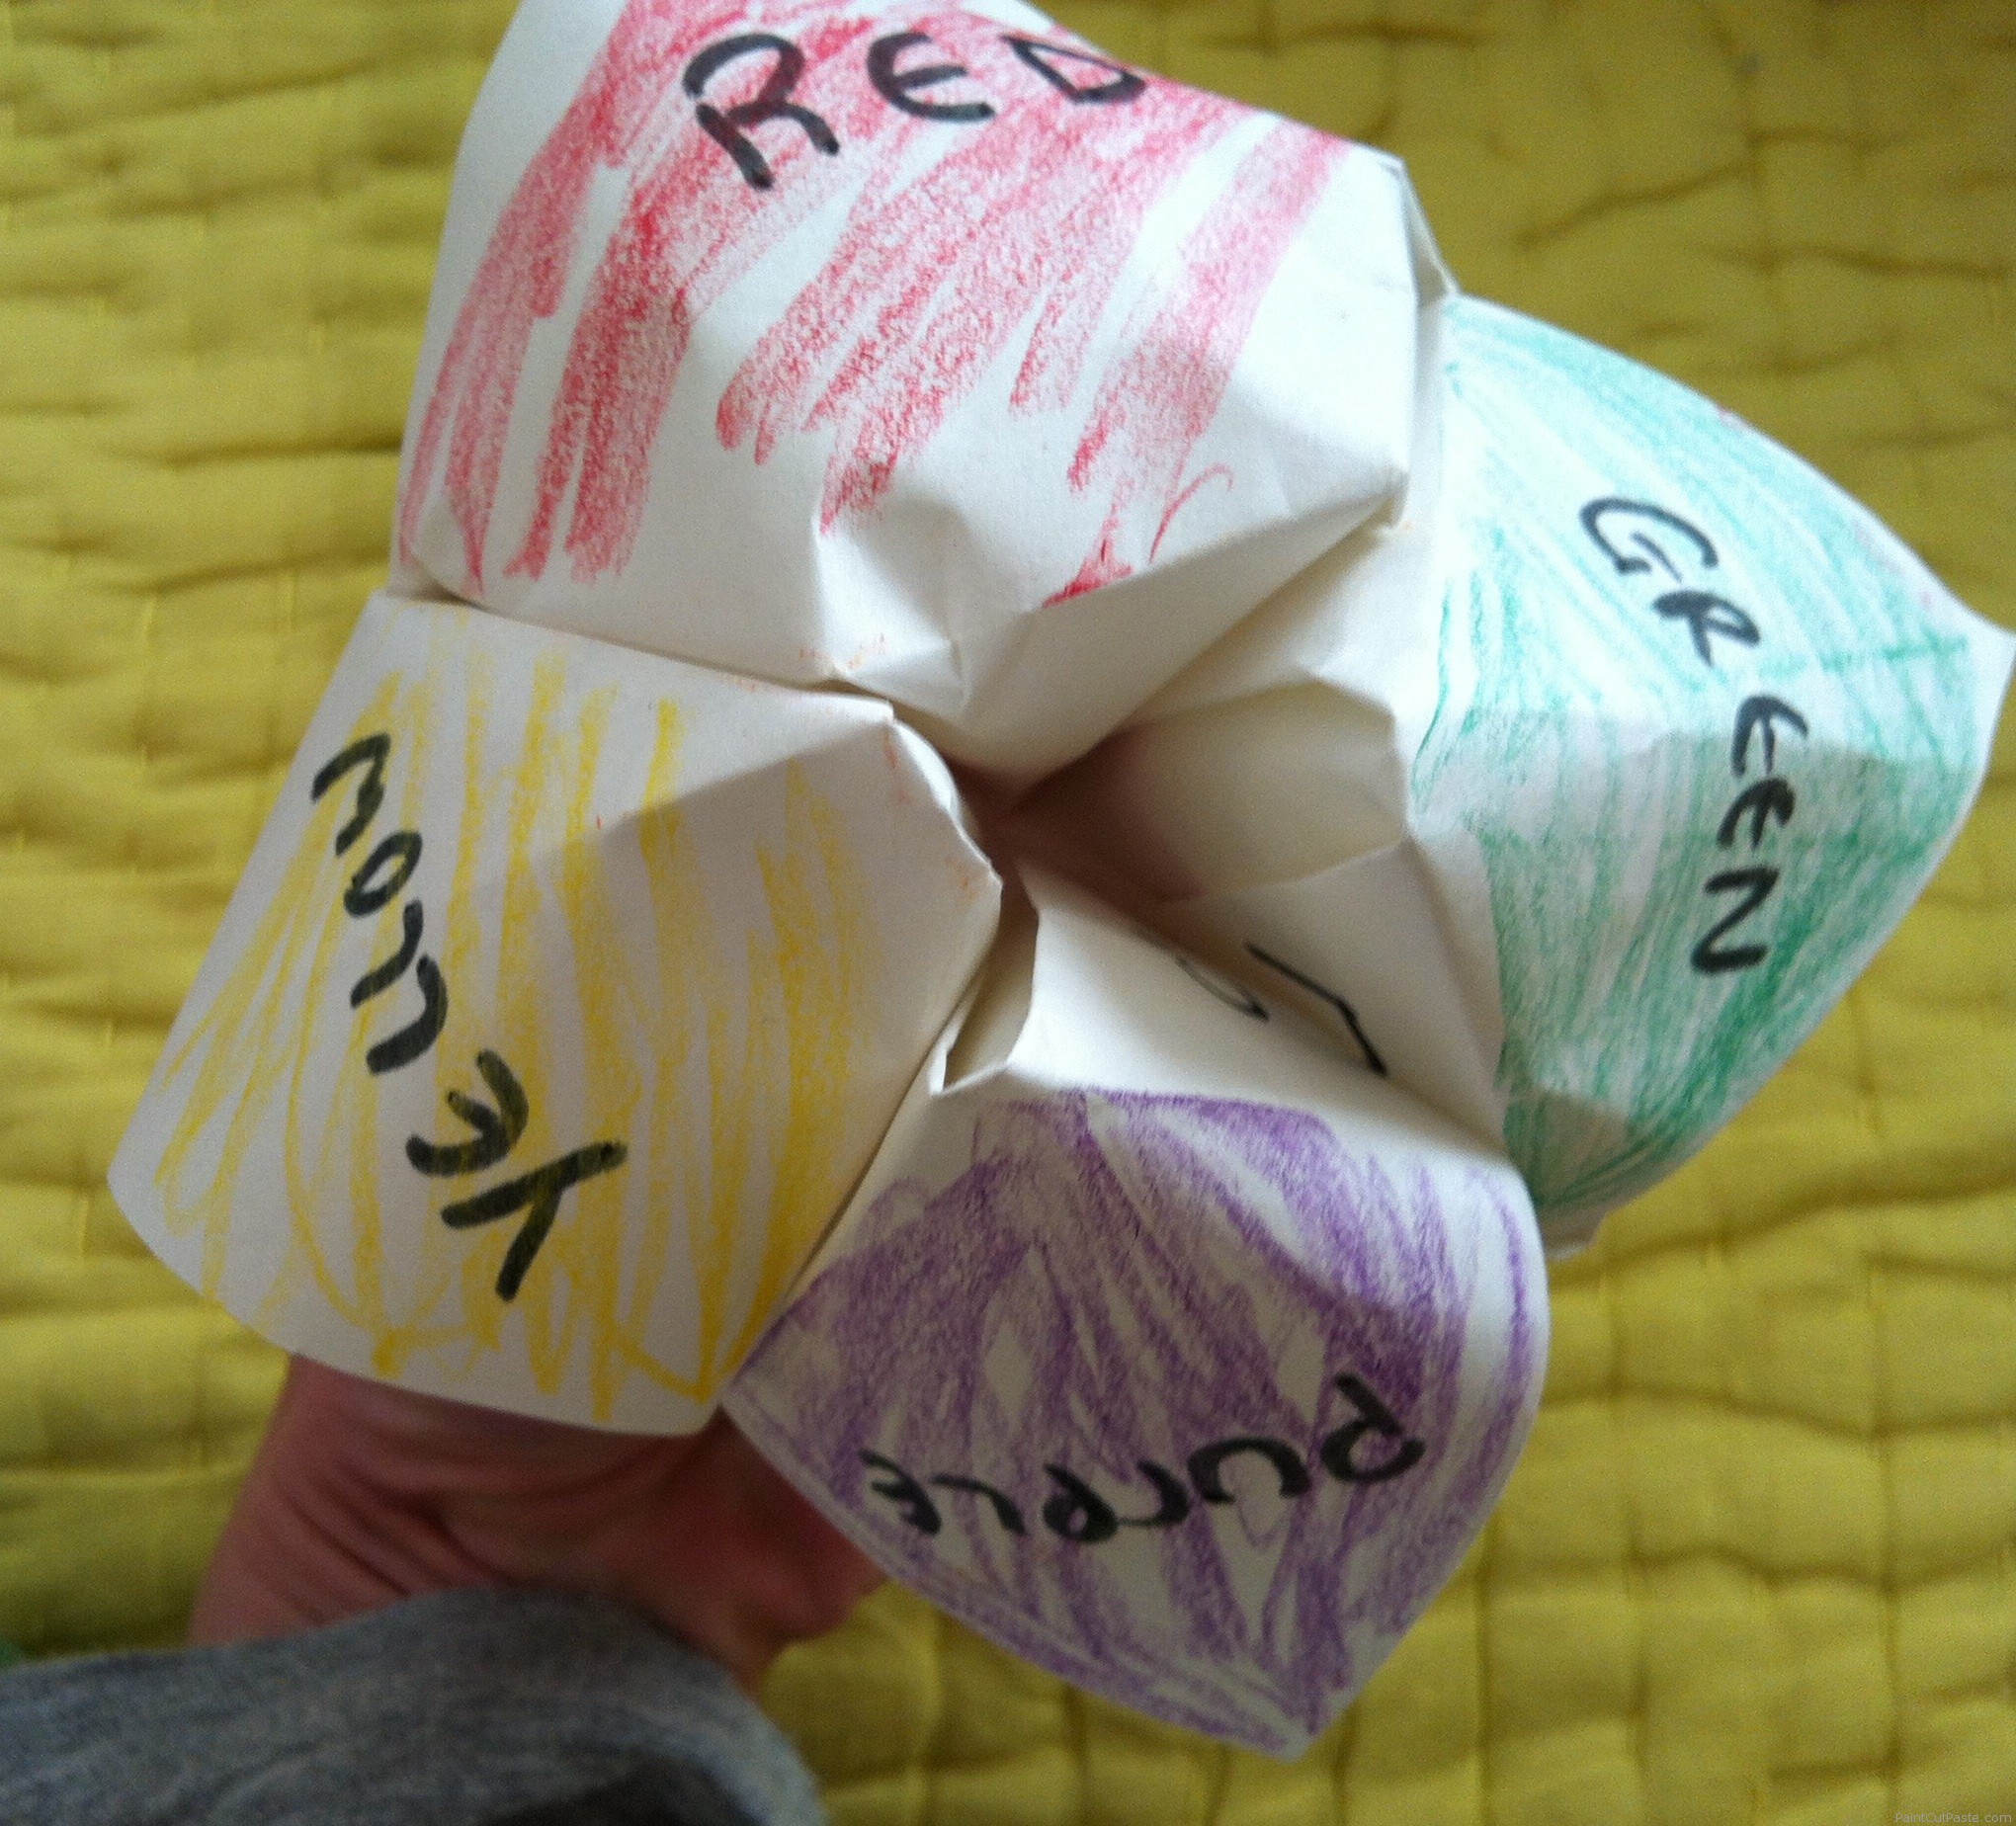 paper fortune teller - How To Play 13 Malaysian ’90s Childhood Games (PHOTOS)